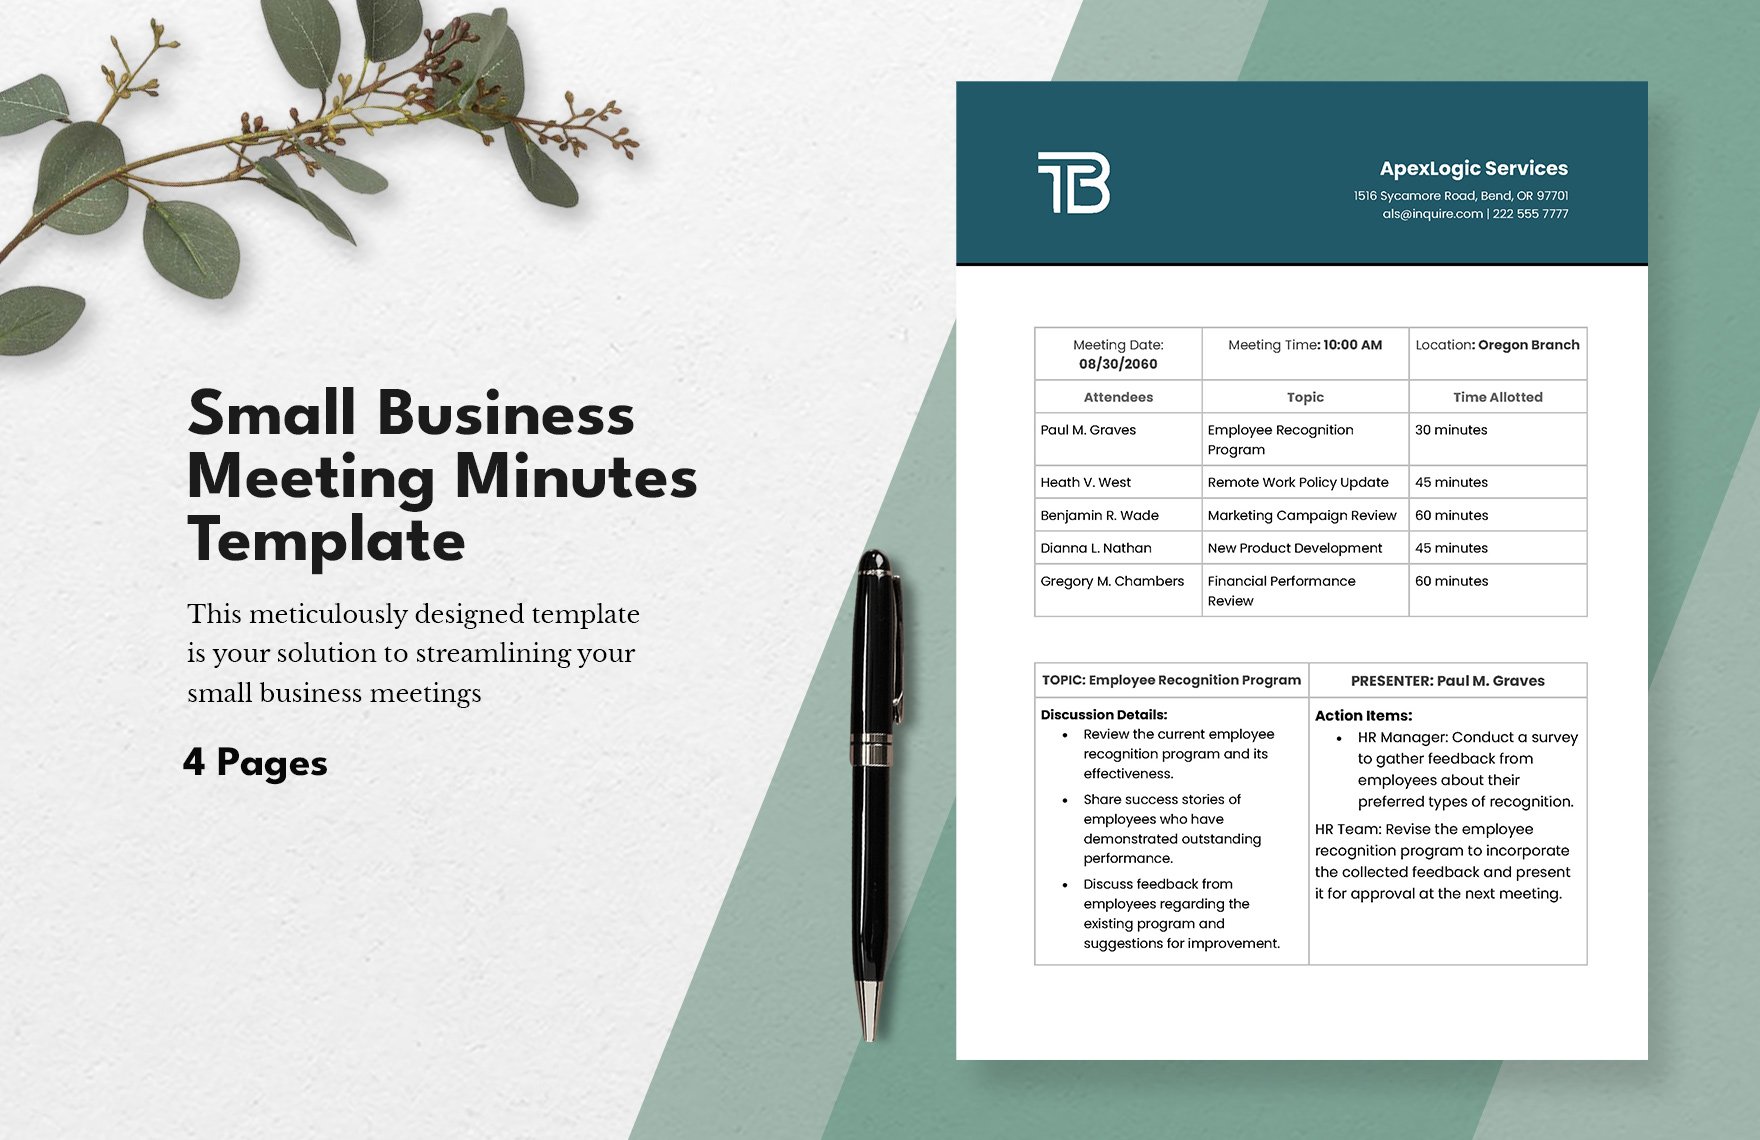 Small Business Meeting Minutes Template